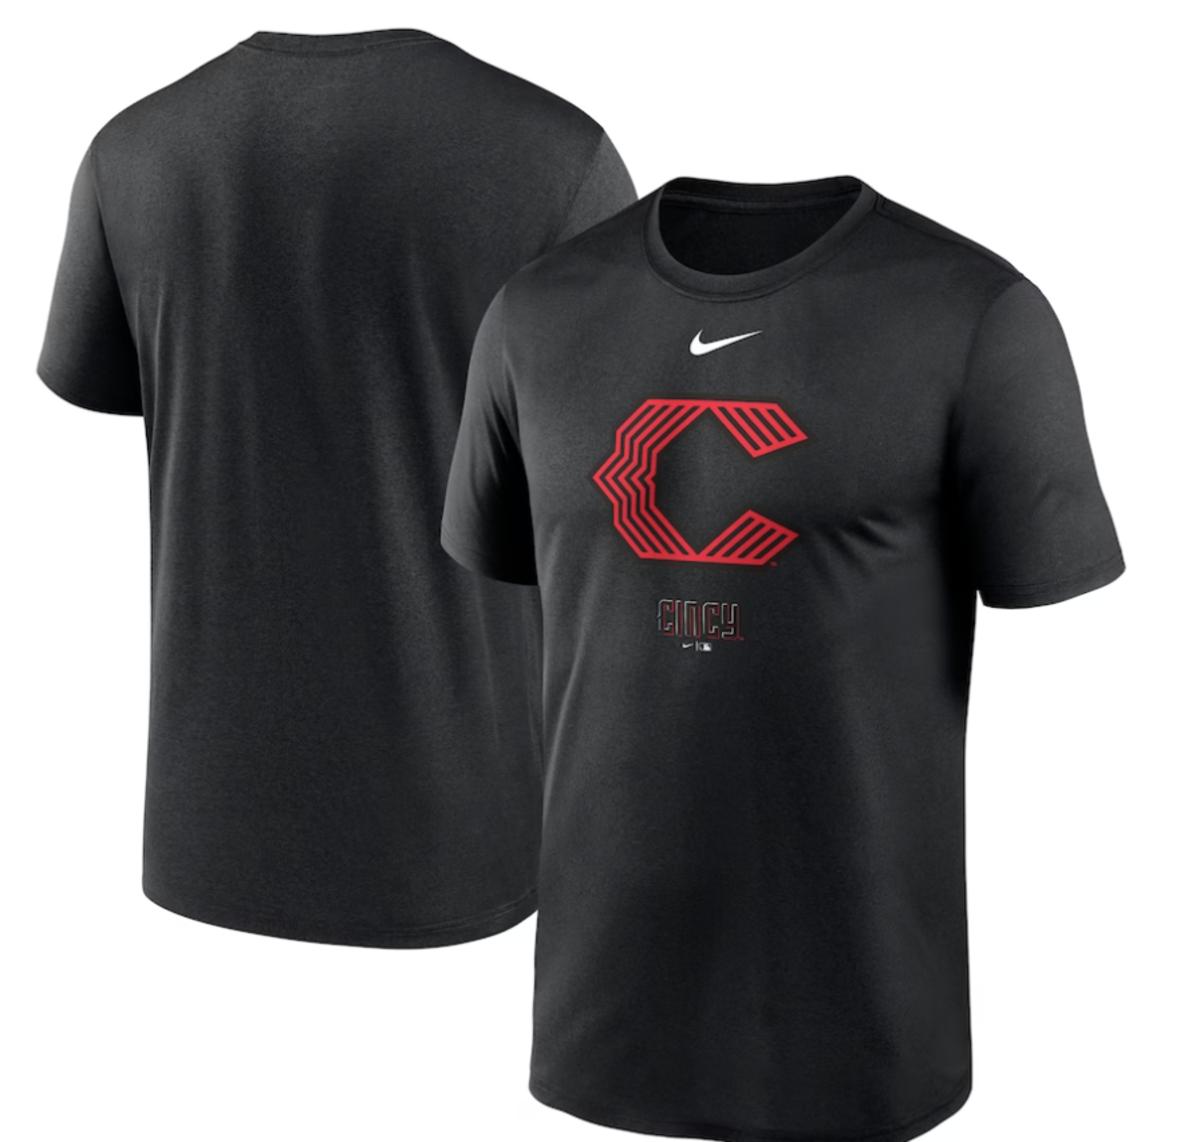 Cincinnati Reds City Connect Collection, how to buy your City